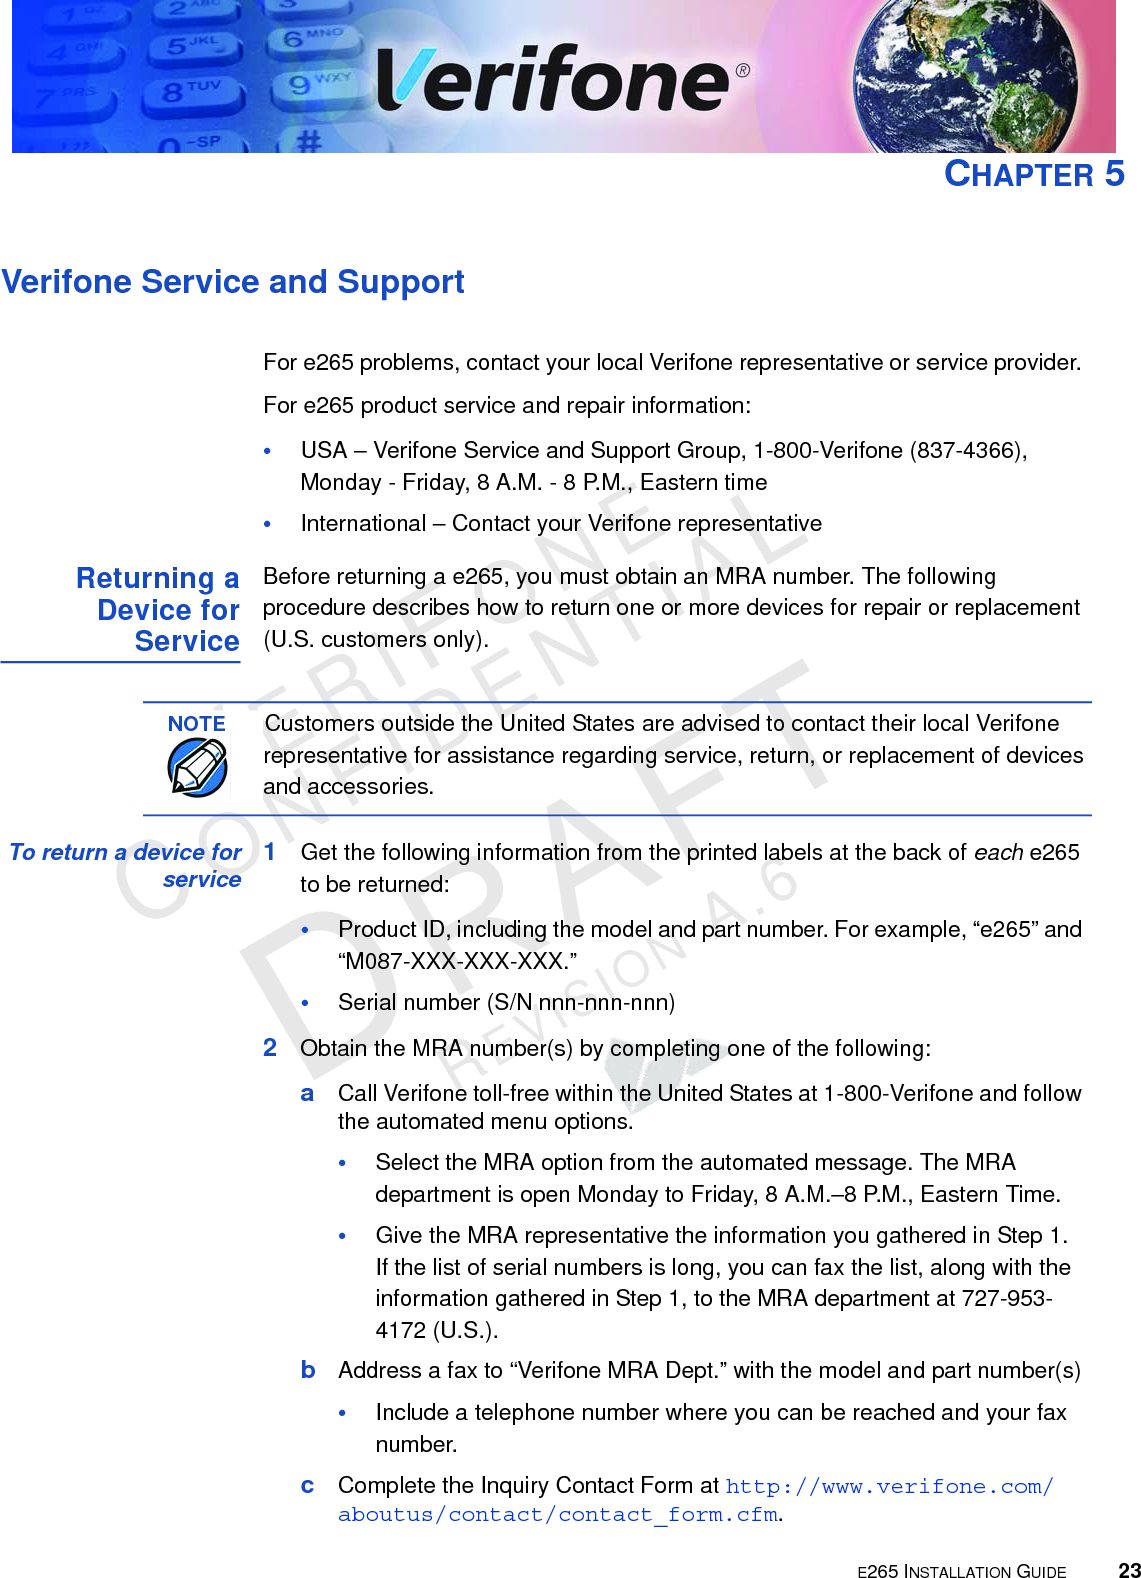 E265 INSTALLATION GUIDE 23VERIFONECONFIDENTIALREVISION A.6 CHAPTER 5Verifone Service and SupportFor e265 problems, contact your local Verifone representative or service provider. For e265 product service and repair information:•USA – Verifone Service and Support Group, 1-800-Verifone (837-4366),  Monday - Friday, 8 A.M. - 8 P.M., Eastern time•International – Contact your Verifone representative Returning a Device for ServiceBefore returning a e265, you must obtain an MRA number. The following procedure describes how to return one or more devices for repair or replacement (U.S. customers only). To return a device for service 1Get the following information from the printed labels at the back of each e265 to be returned:•Product ID, including the model and part number. For example, “e265” and “M087-XXX-XXX-XXX.”•Serial number (S/N nnn-nnn-nnn)2Obtain the MRA number(s) by completing one of the following:aCall Verifone toll-free within the United States at 1-800-Verifone and follow the automated menu options.•Select the MRA option from the automated message. The MRA department is open Monday to Friday, 8 A.M.–8 P.M., Eastern Time.•Give the MRA representative the information you gathered in Step 1. If the list of serial numbers is long, you can fax the list, along with the information gathered in Step 1, to the MRA department at 727-953-4172 (U.S.).bAddress a fax to “Verifone MRA Dept.” with the model and part number(s)•Include a telephone number where you can be reached and your fax number.cComplete the Inquiry Contact Form at http://www.verifone.com/aboutus/contact/contact_form.cfm.NOTECustomers outside the United States are advised to contact their local Verifone representative for assistance regarding service, return, or replacement of devices and accessories.